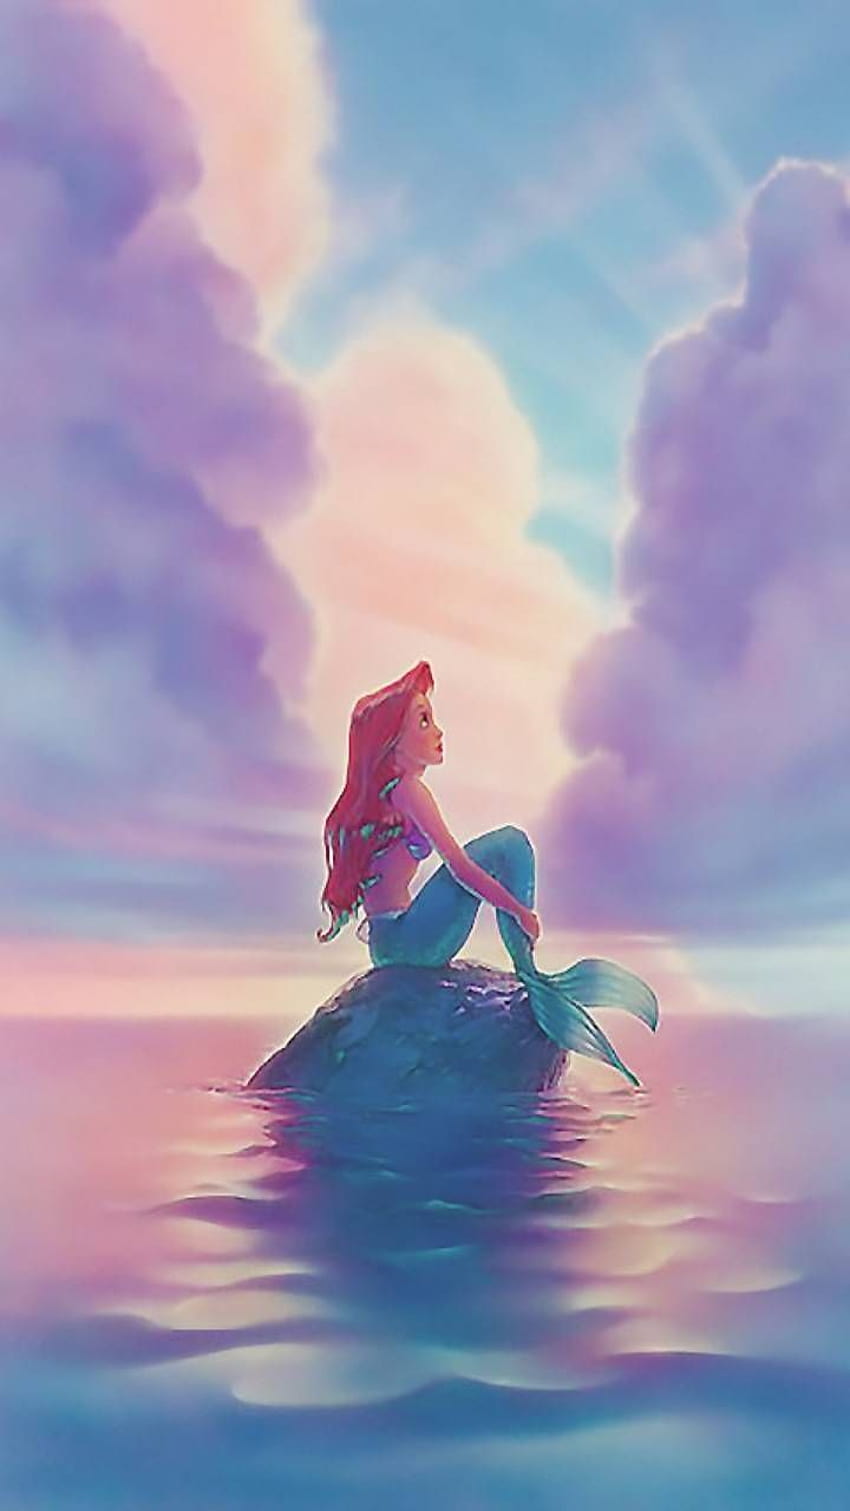 The Little Mermaid wallpaper for iPhone and Android phone. - Ariel